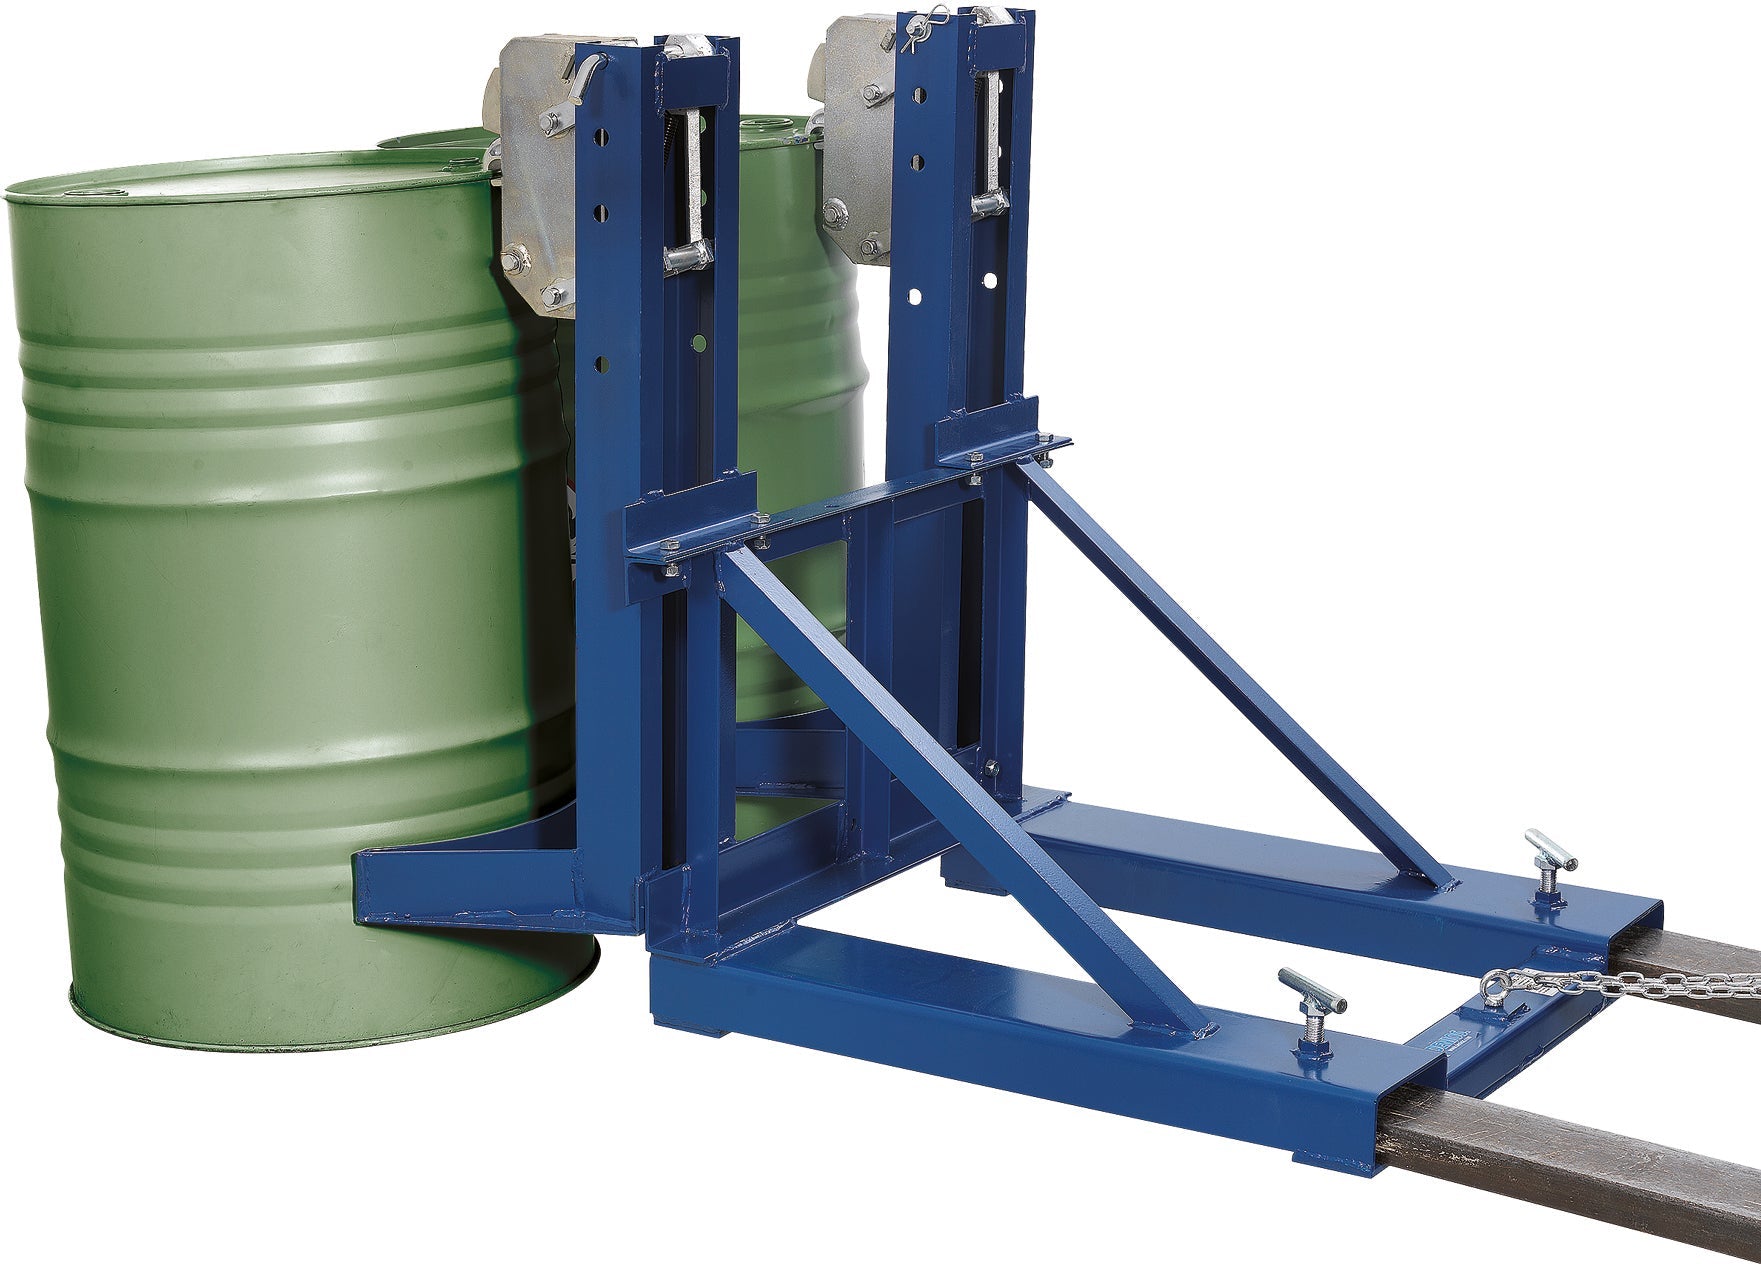 Drum lifter steel, f/ 2 drums blue, for 700 kg, steel powder-coated smooth